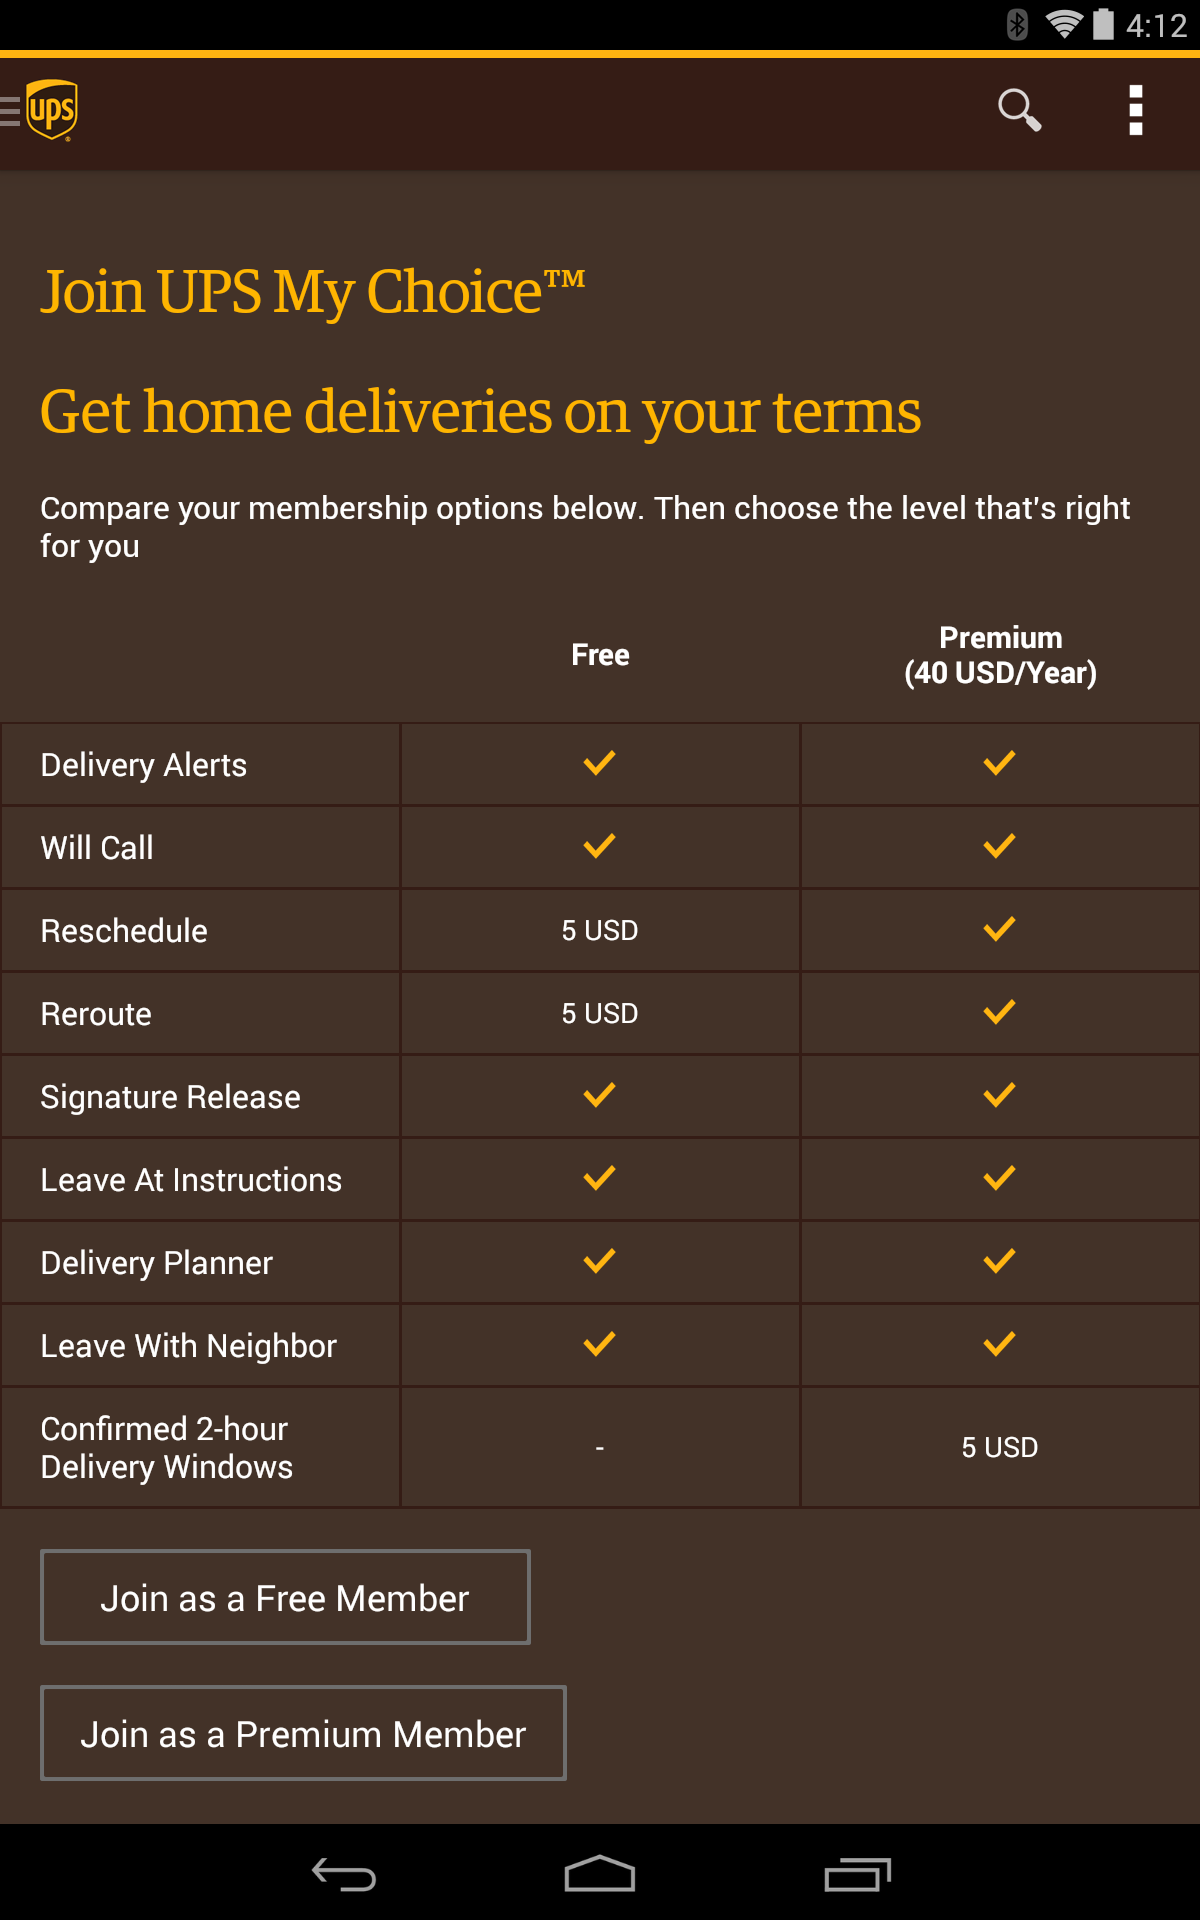 UPS Mobile Android App Gets 4.1 Update Adding My Choice Integration For